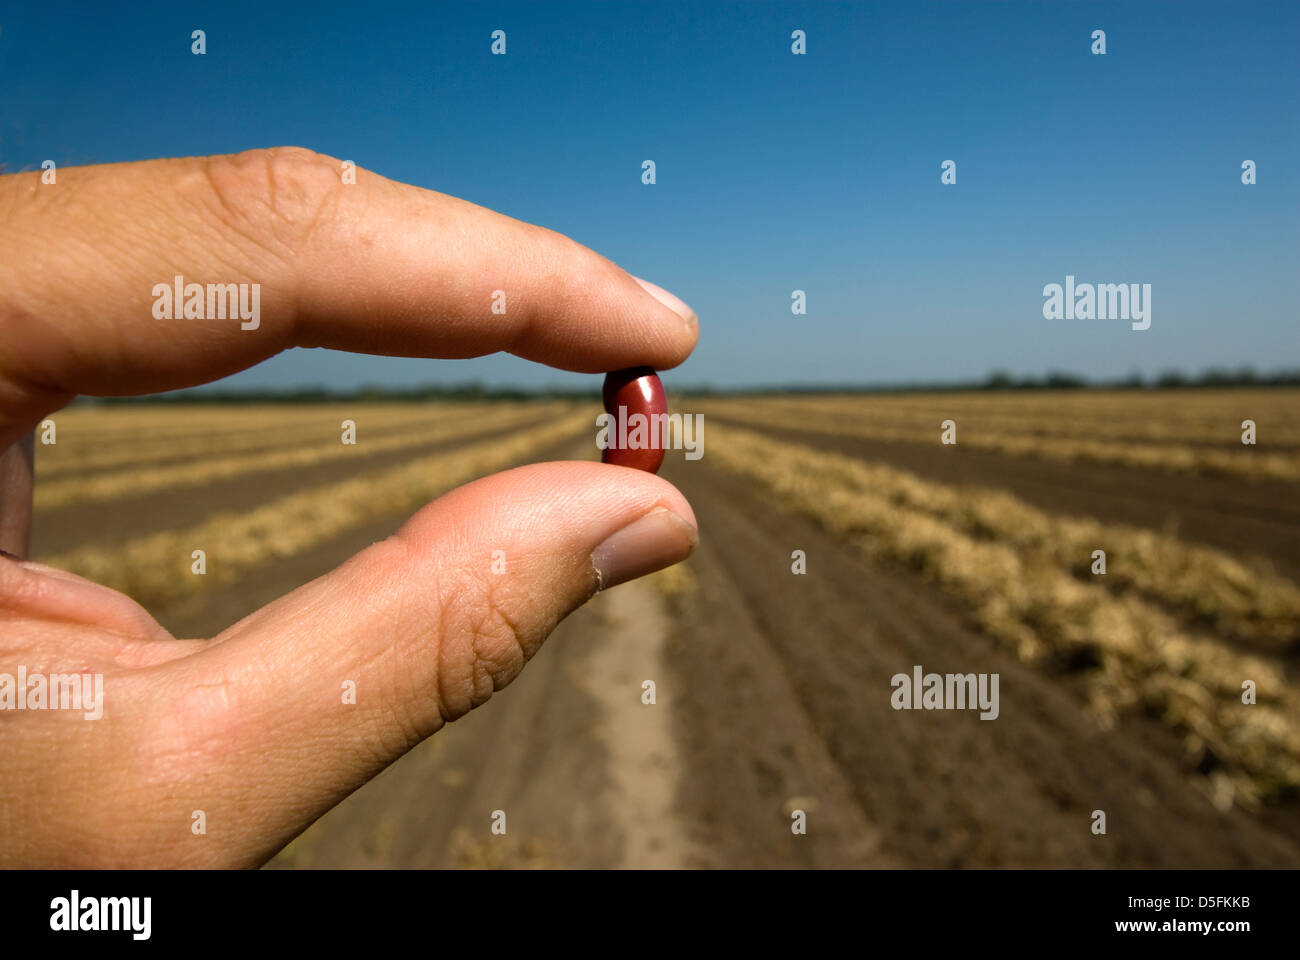 Finger and thumb holding red kidney bean Stock Photo